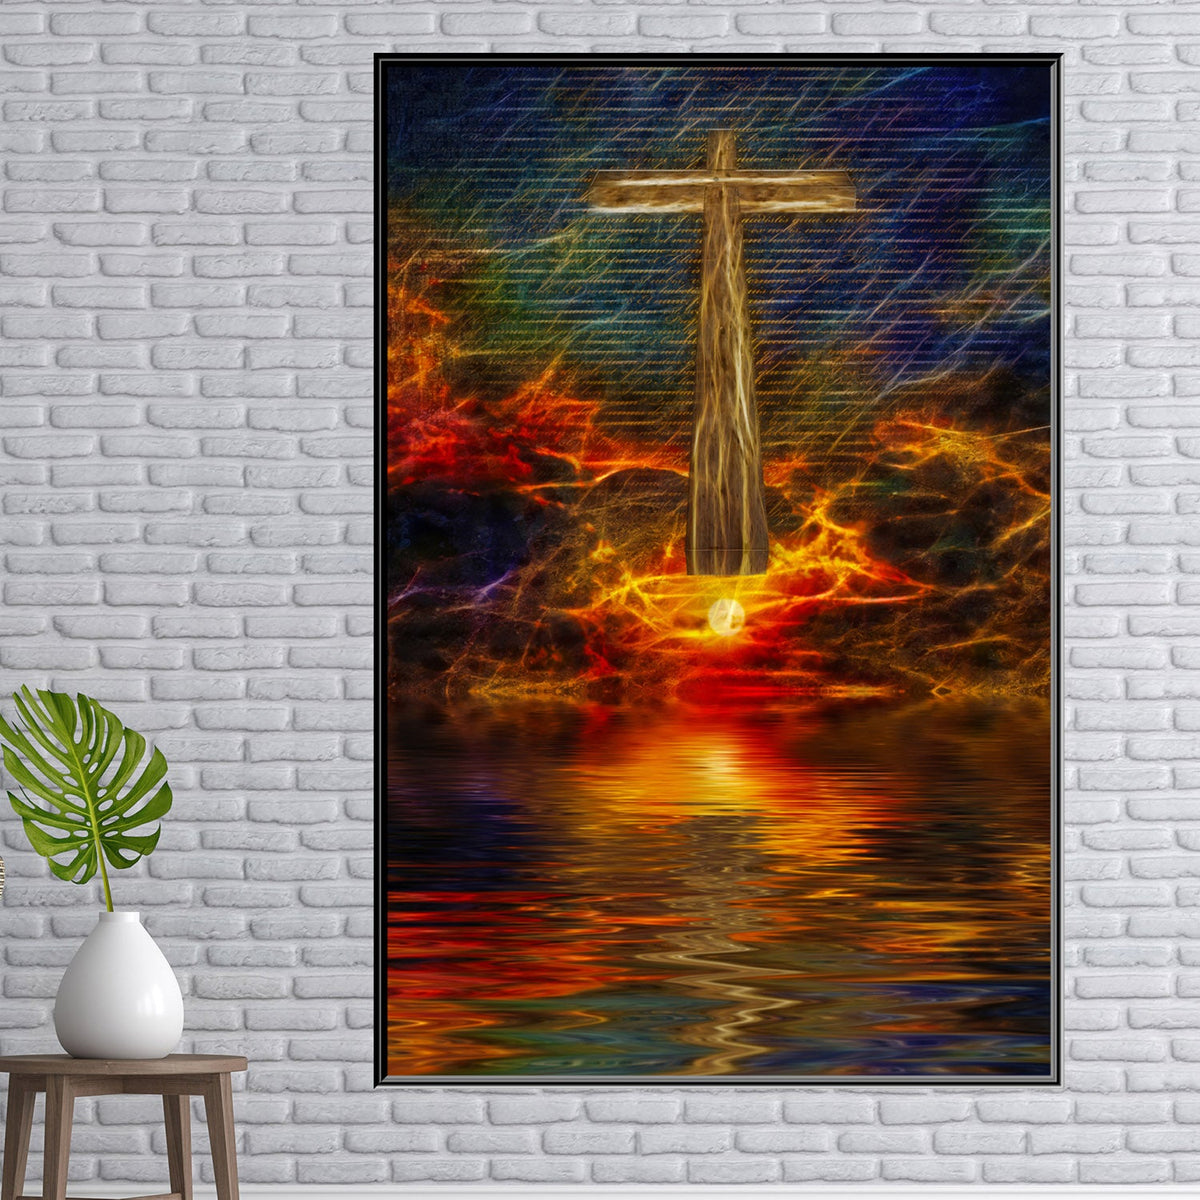 https://cdn.shopify.com/s/files/1/0387/9986/8044/products/ThePassionofTheCrossCanvasArtprintFloatingFrame-2.jpg